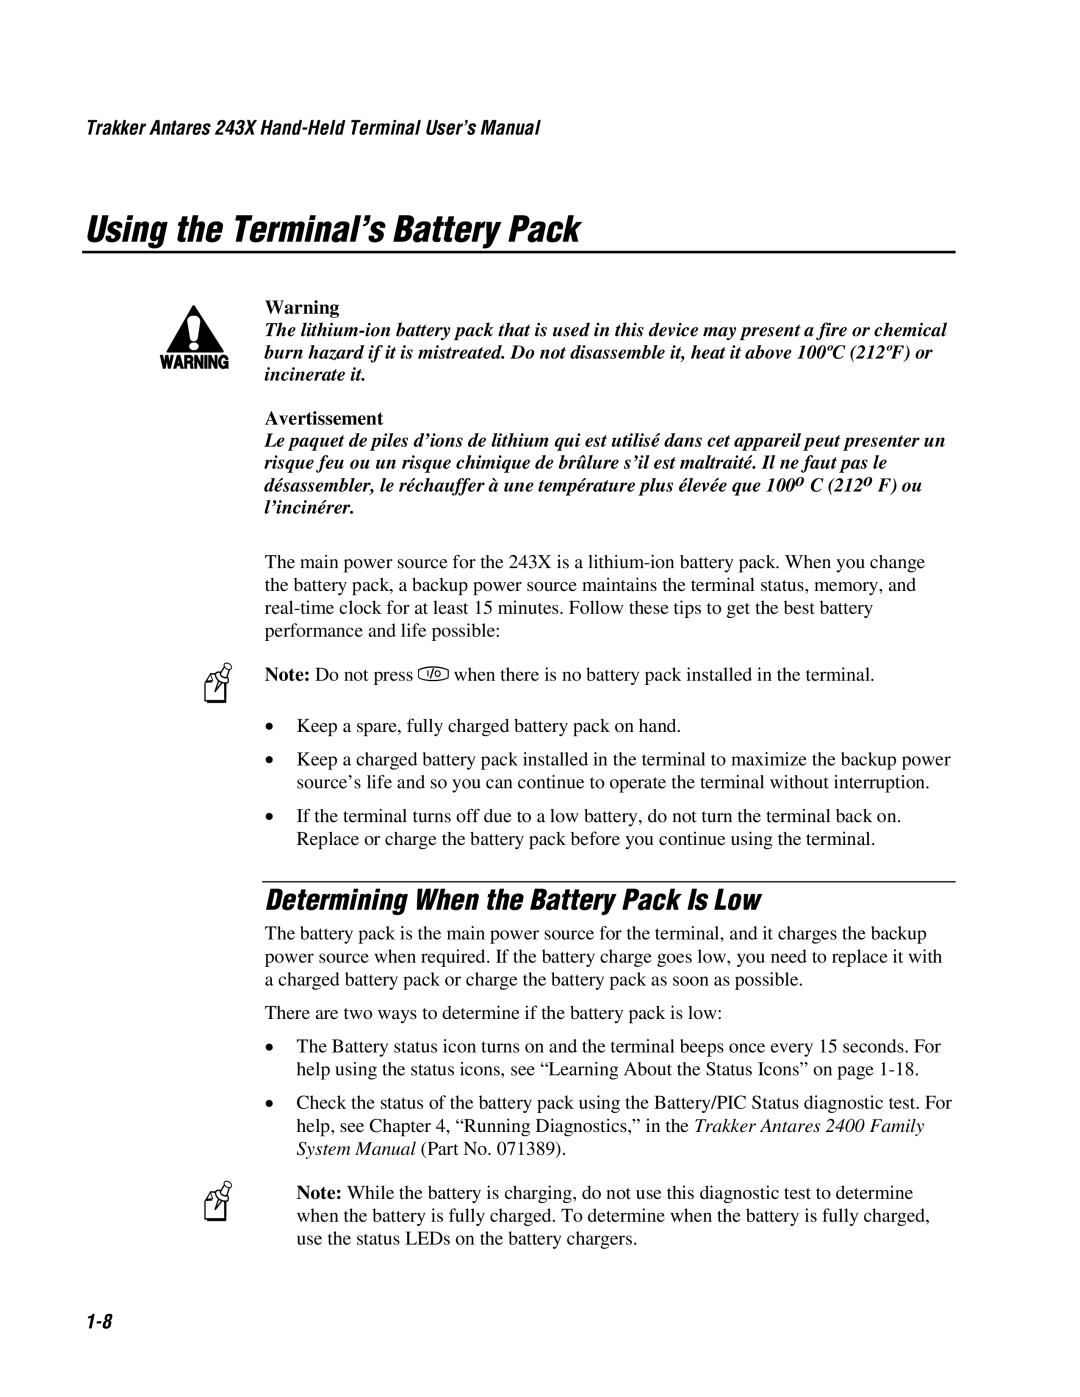 IBM 243X user manual Using the Terminal’s Battery Pack, Determining When the Battery Pack Is Low, Avertissement 